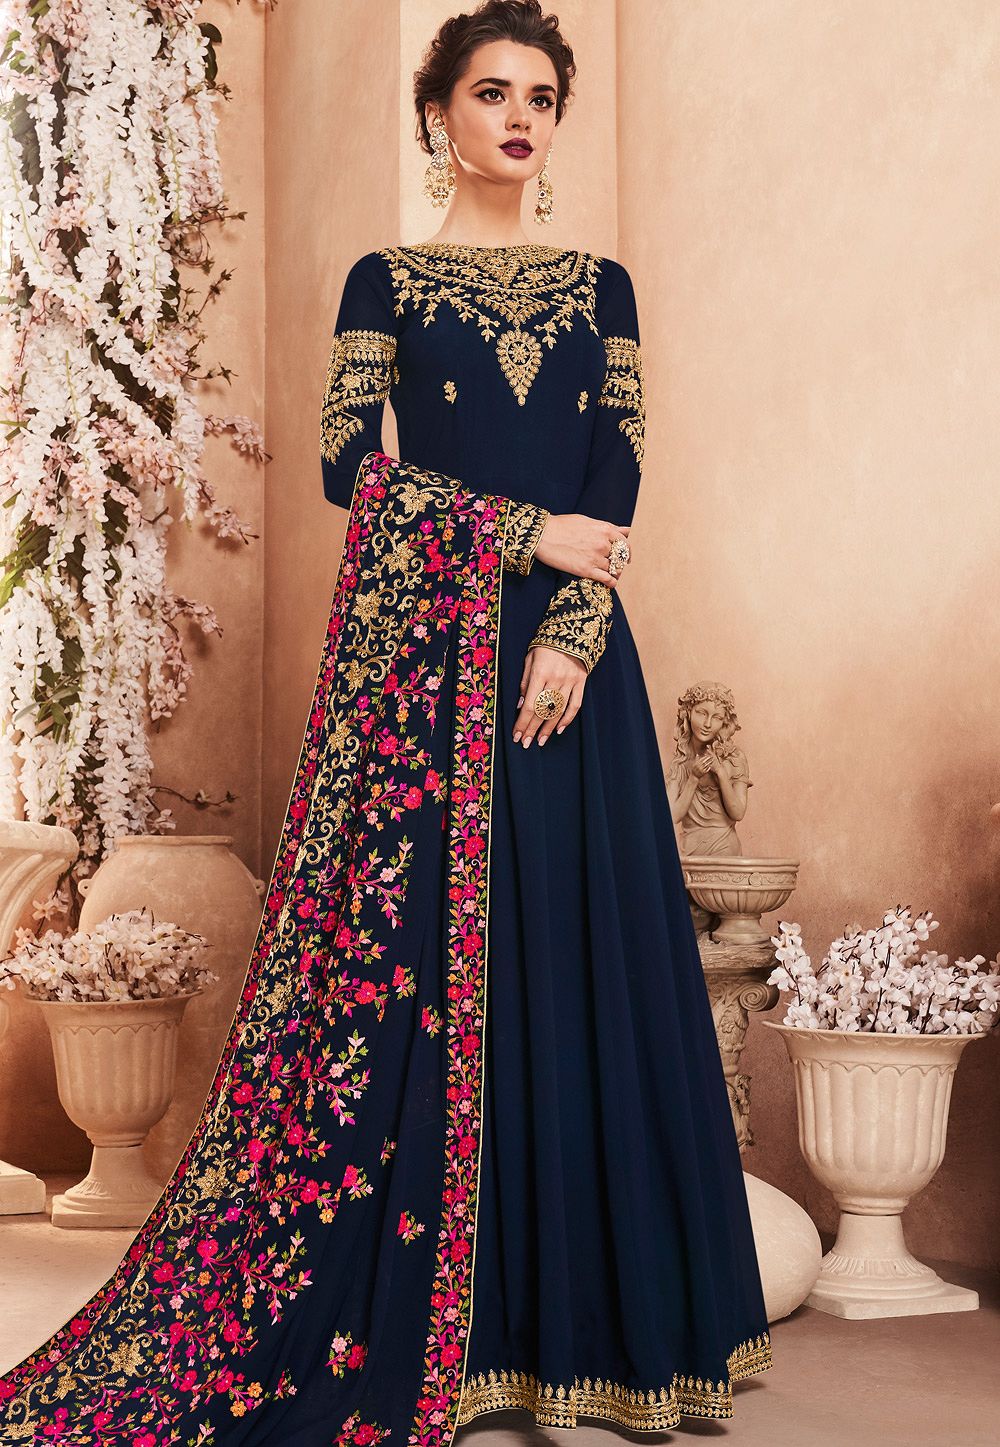 Buy ROYAL EXPORT Women's New Latest Anarkali Stylish Indian Ethnic wear  Ladies semistitch Heavy Gown with Dupatta for Women (Chiku) at Amazon.in